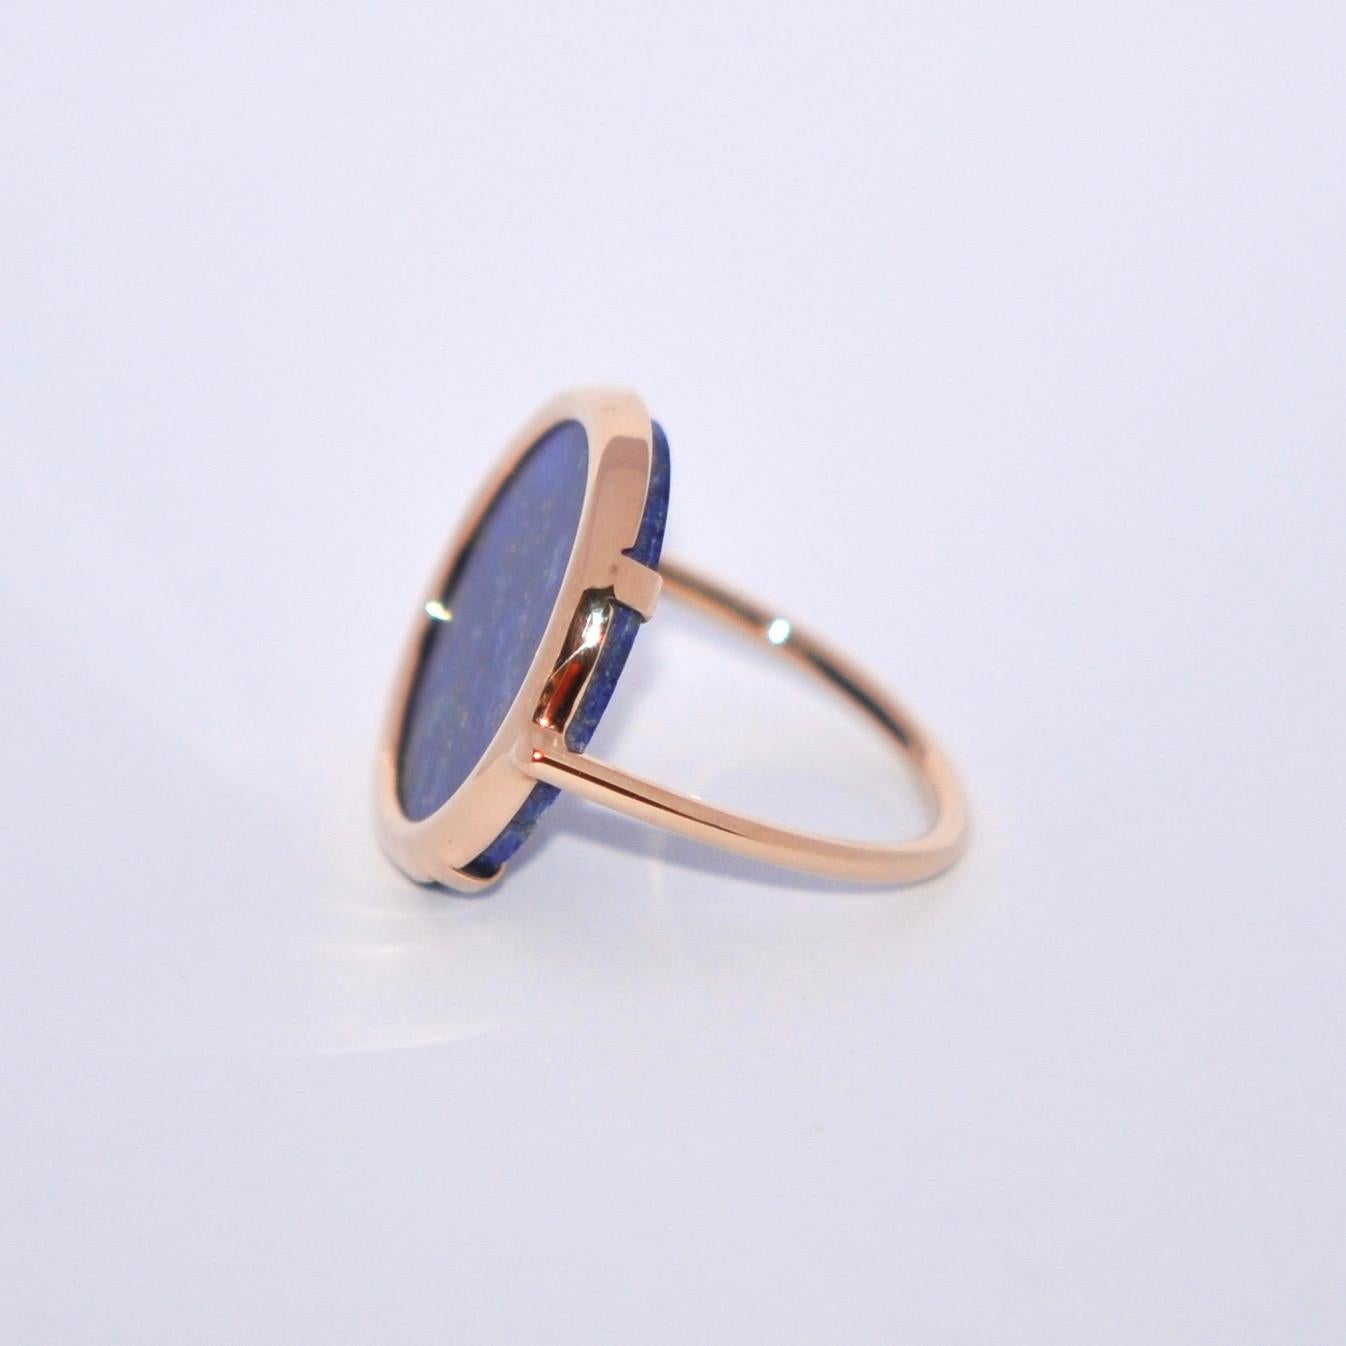 Discover this Round Lapis lazuli and Rose Gold 18 Karat Cocktail Ring.
Lapis Lazuli
Rose Gold 18 Karat
French Size  52
US Size 6
